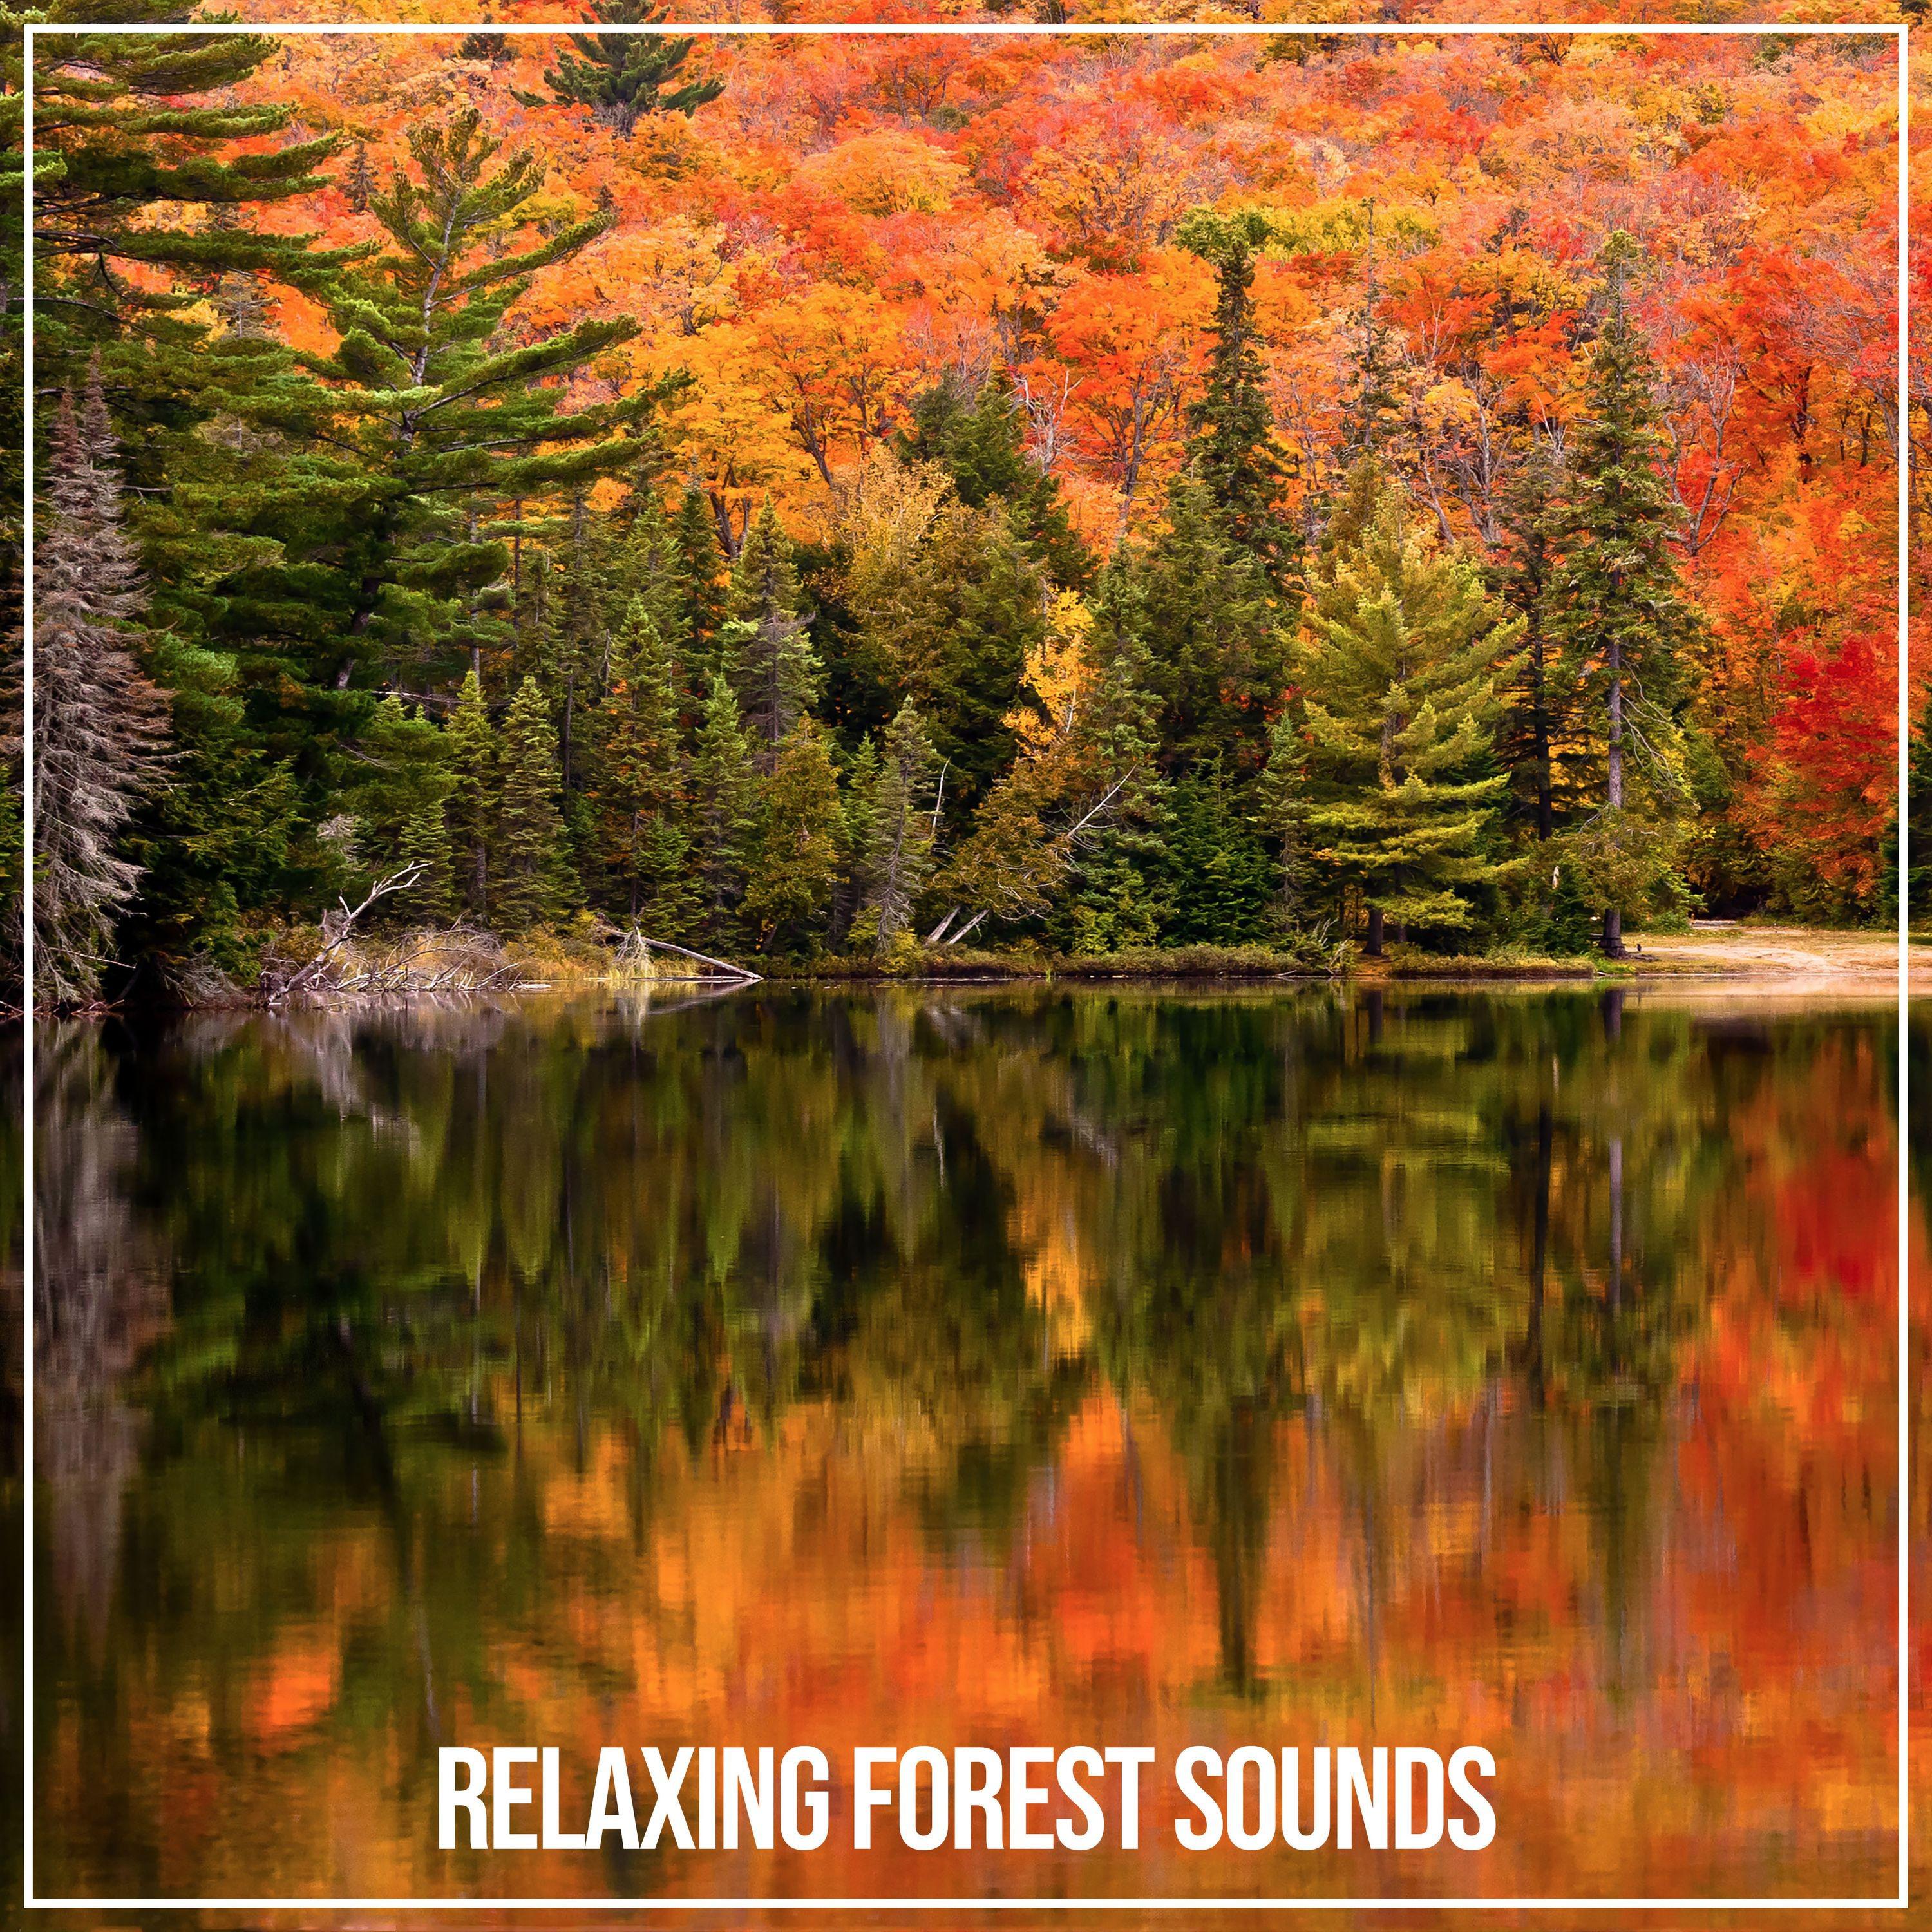 Relaxing Forest Sounds